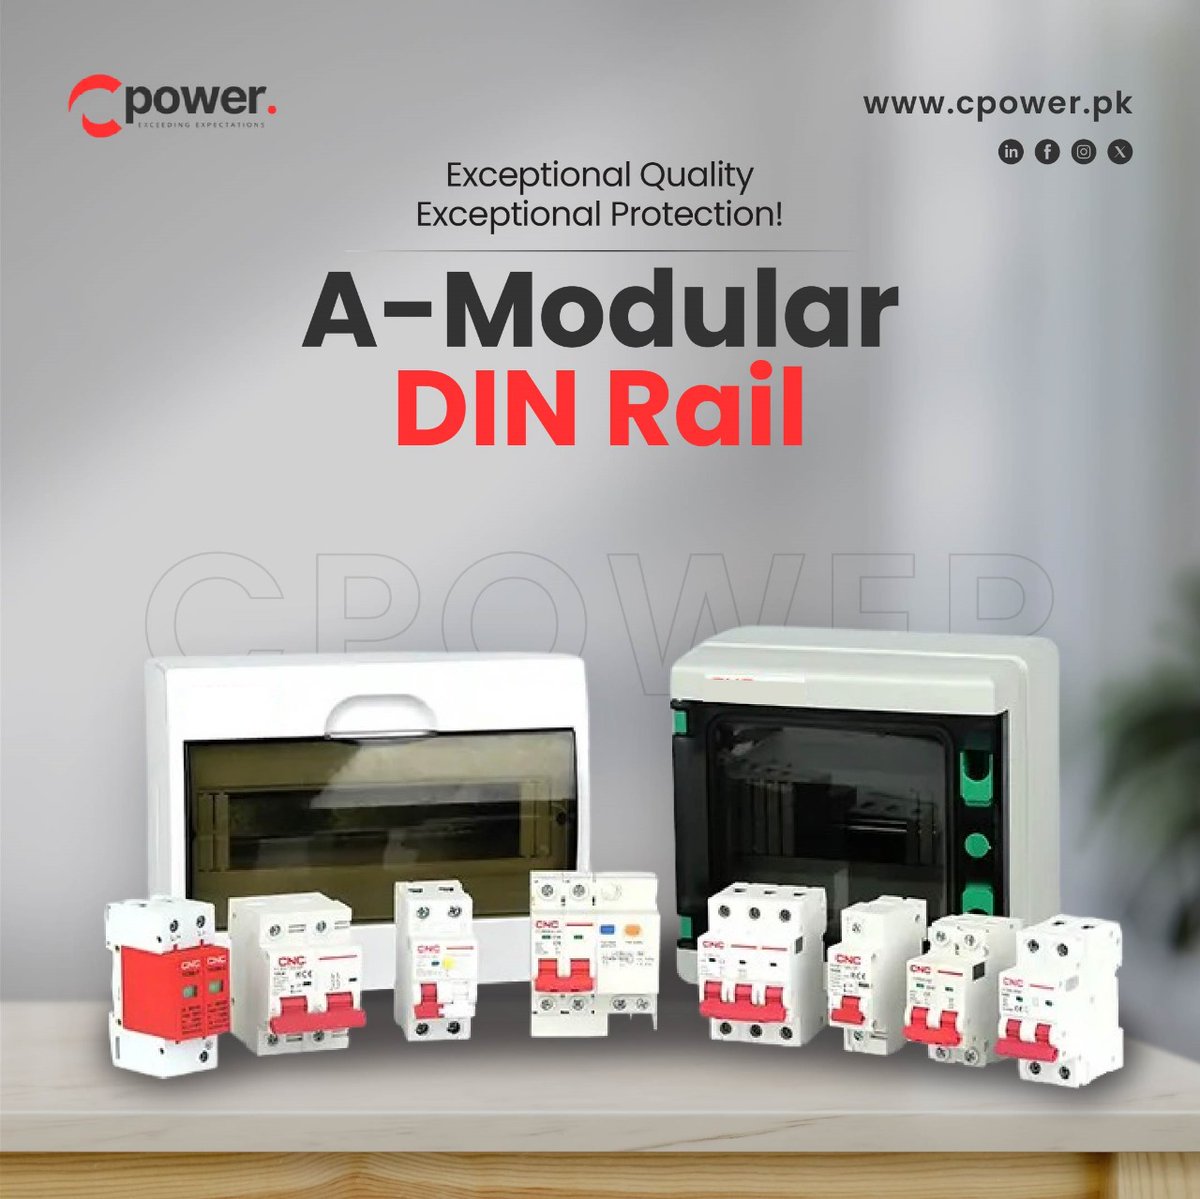 Empowering excellence, securing reliability.
c-power.pk sets the standard with A-Modular DIN RAIL.

#QualityPower #ExceptionalProtection #DINRAILInnovation #ReliableEnergy #CPowerInnovates #PowerSafety #EfficientEnergy #Electricity #SecureConnections #cpower